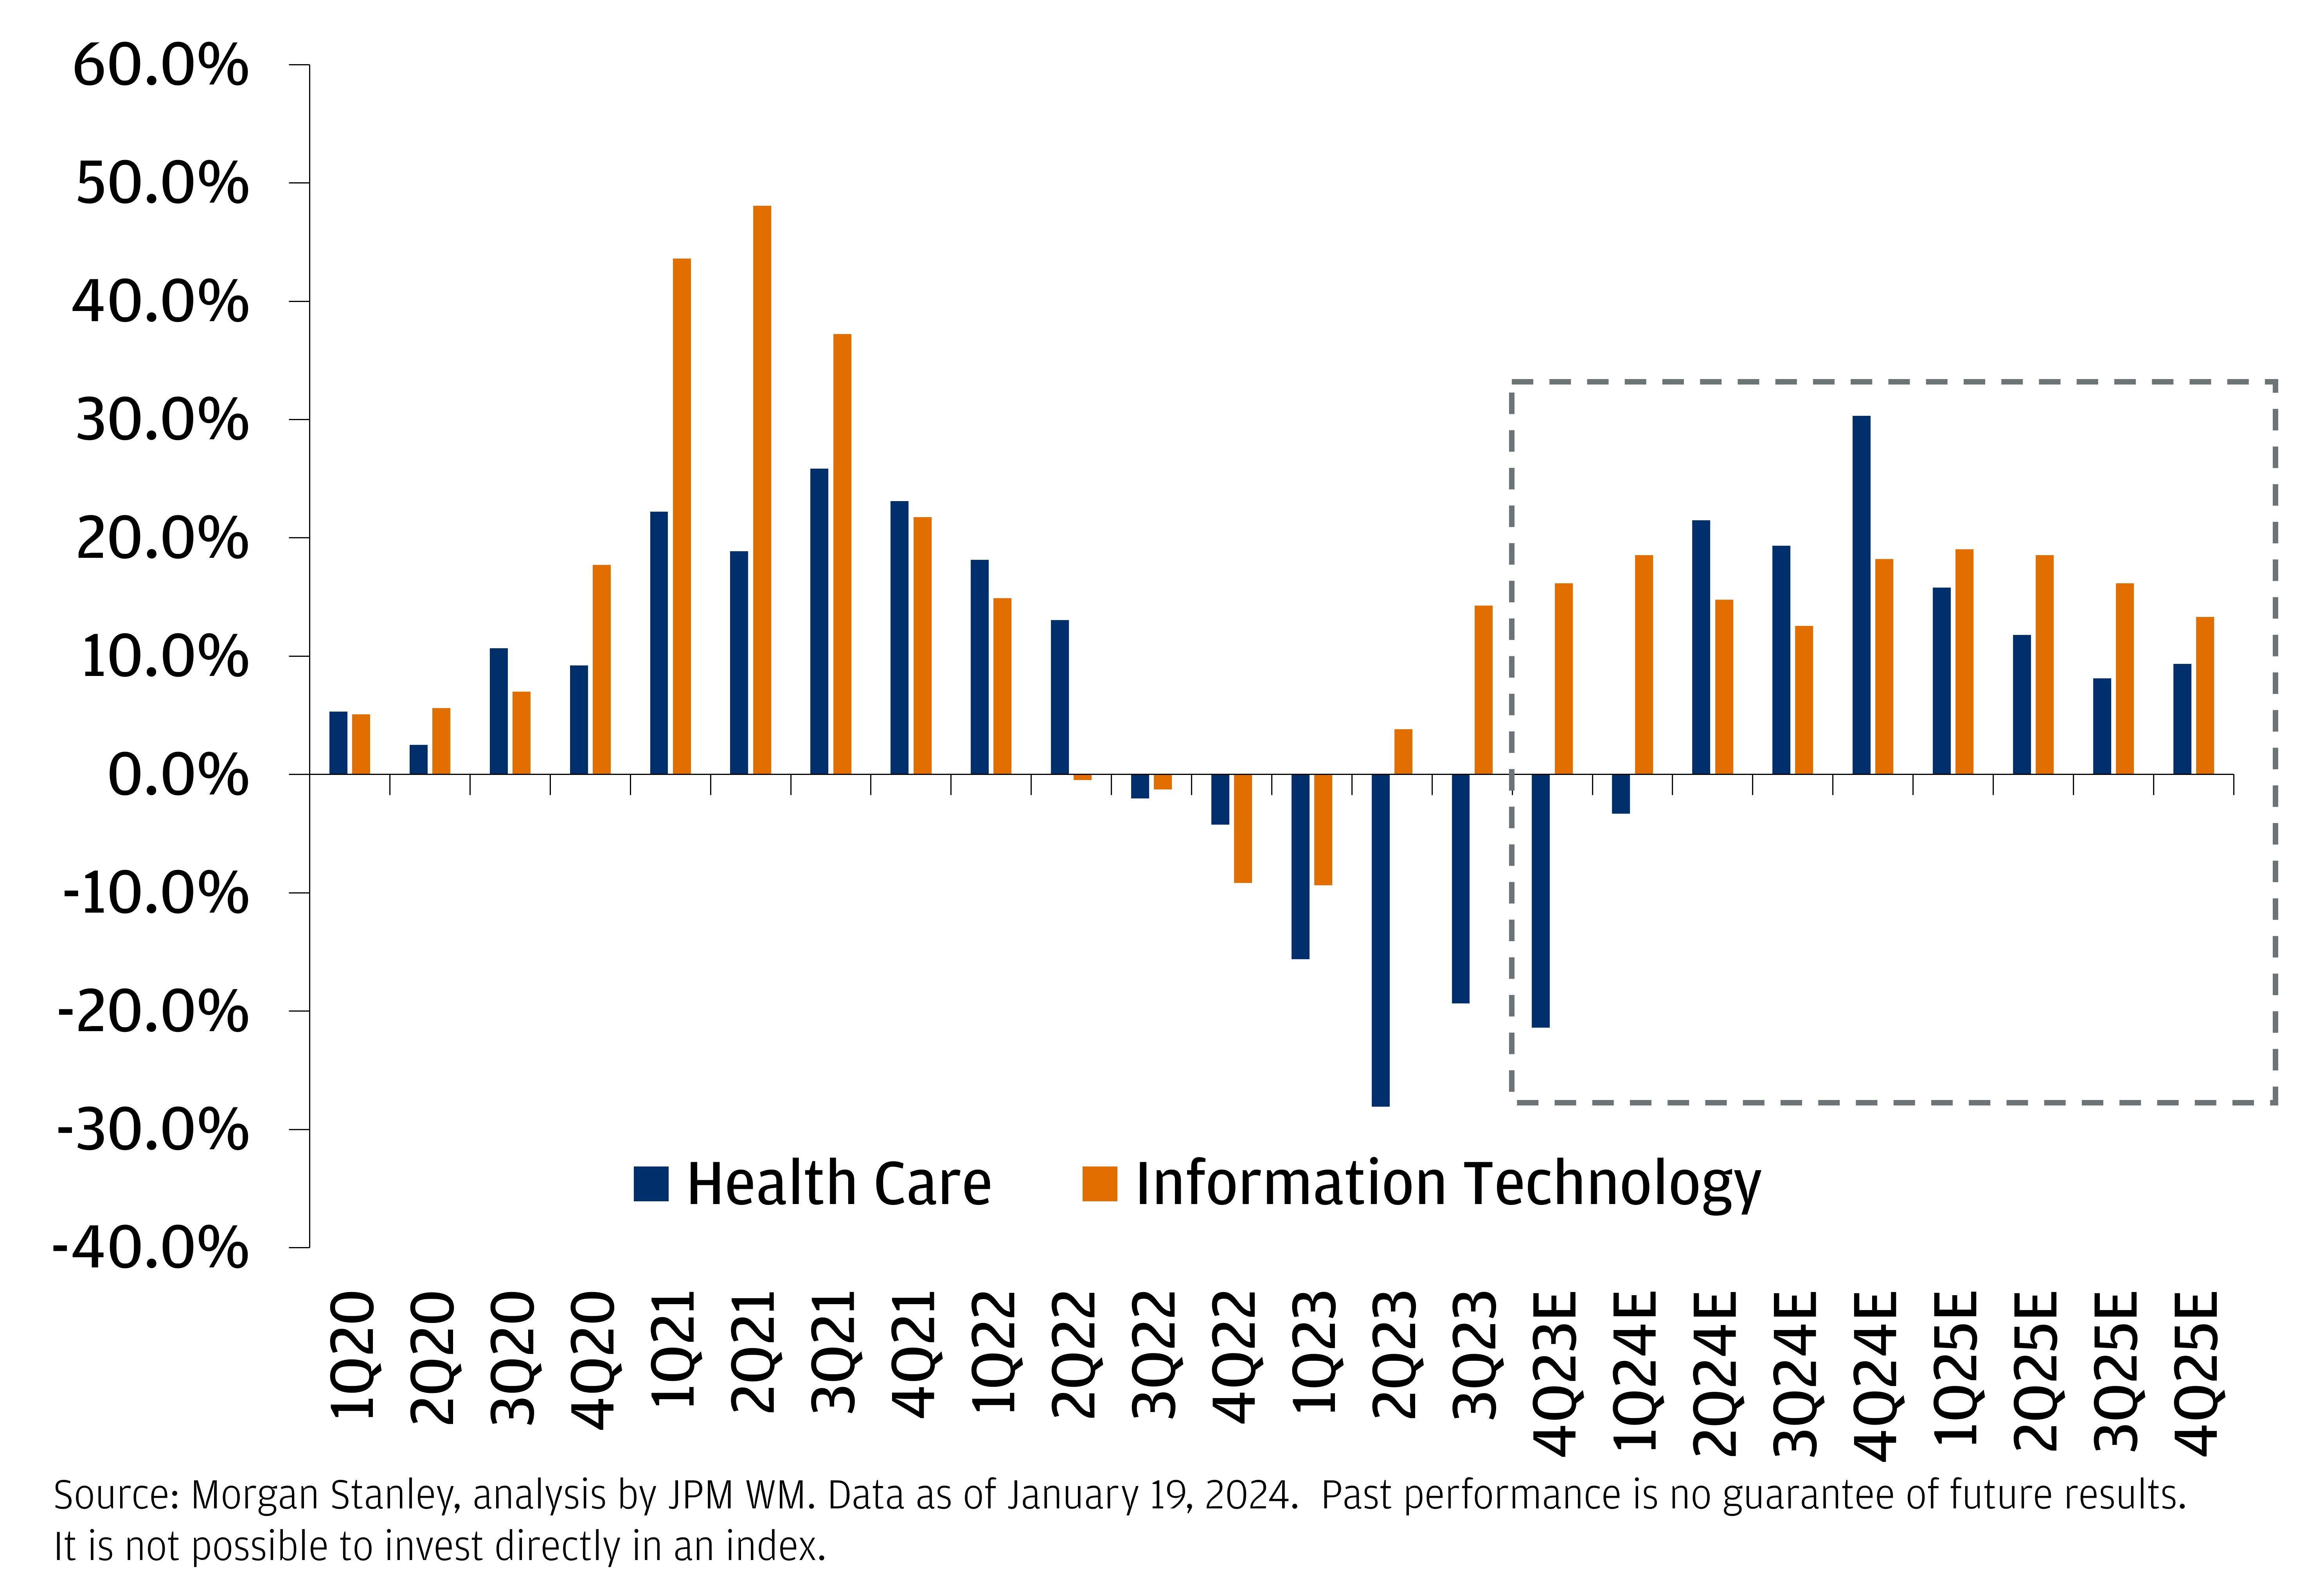  This chart shows year-over-year quarterly earnings per share growth, for both the Healthcare and Information Technology sectors.